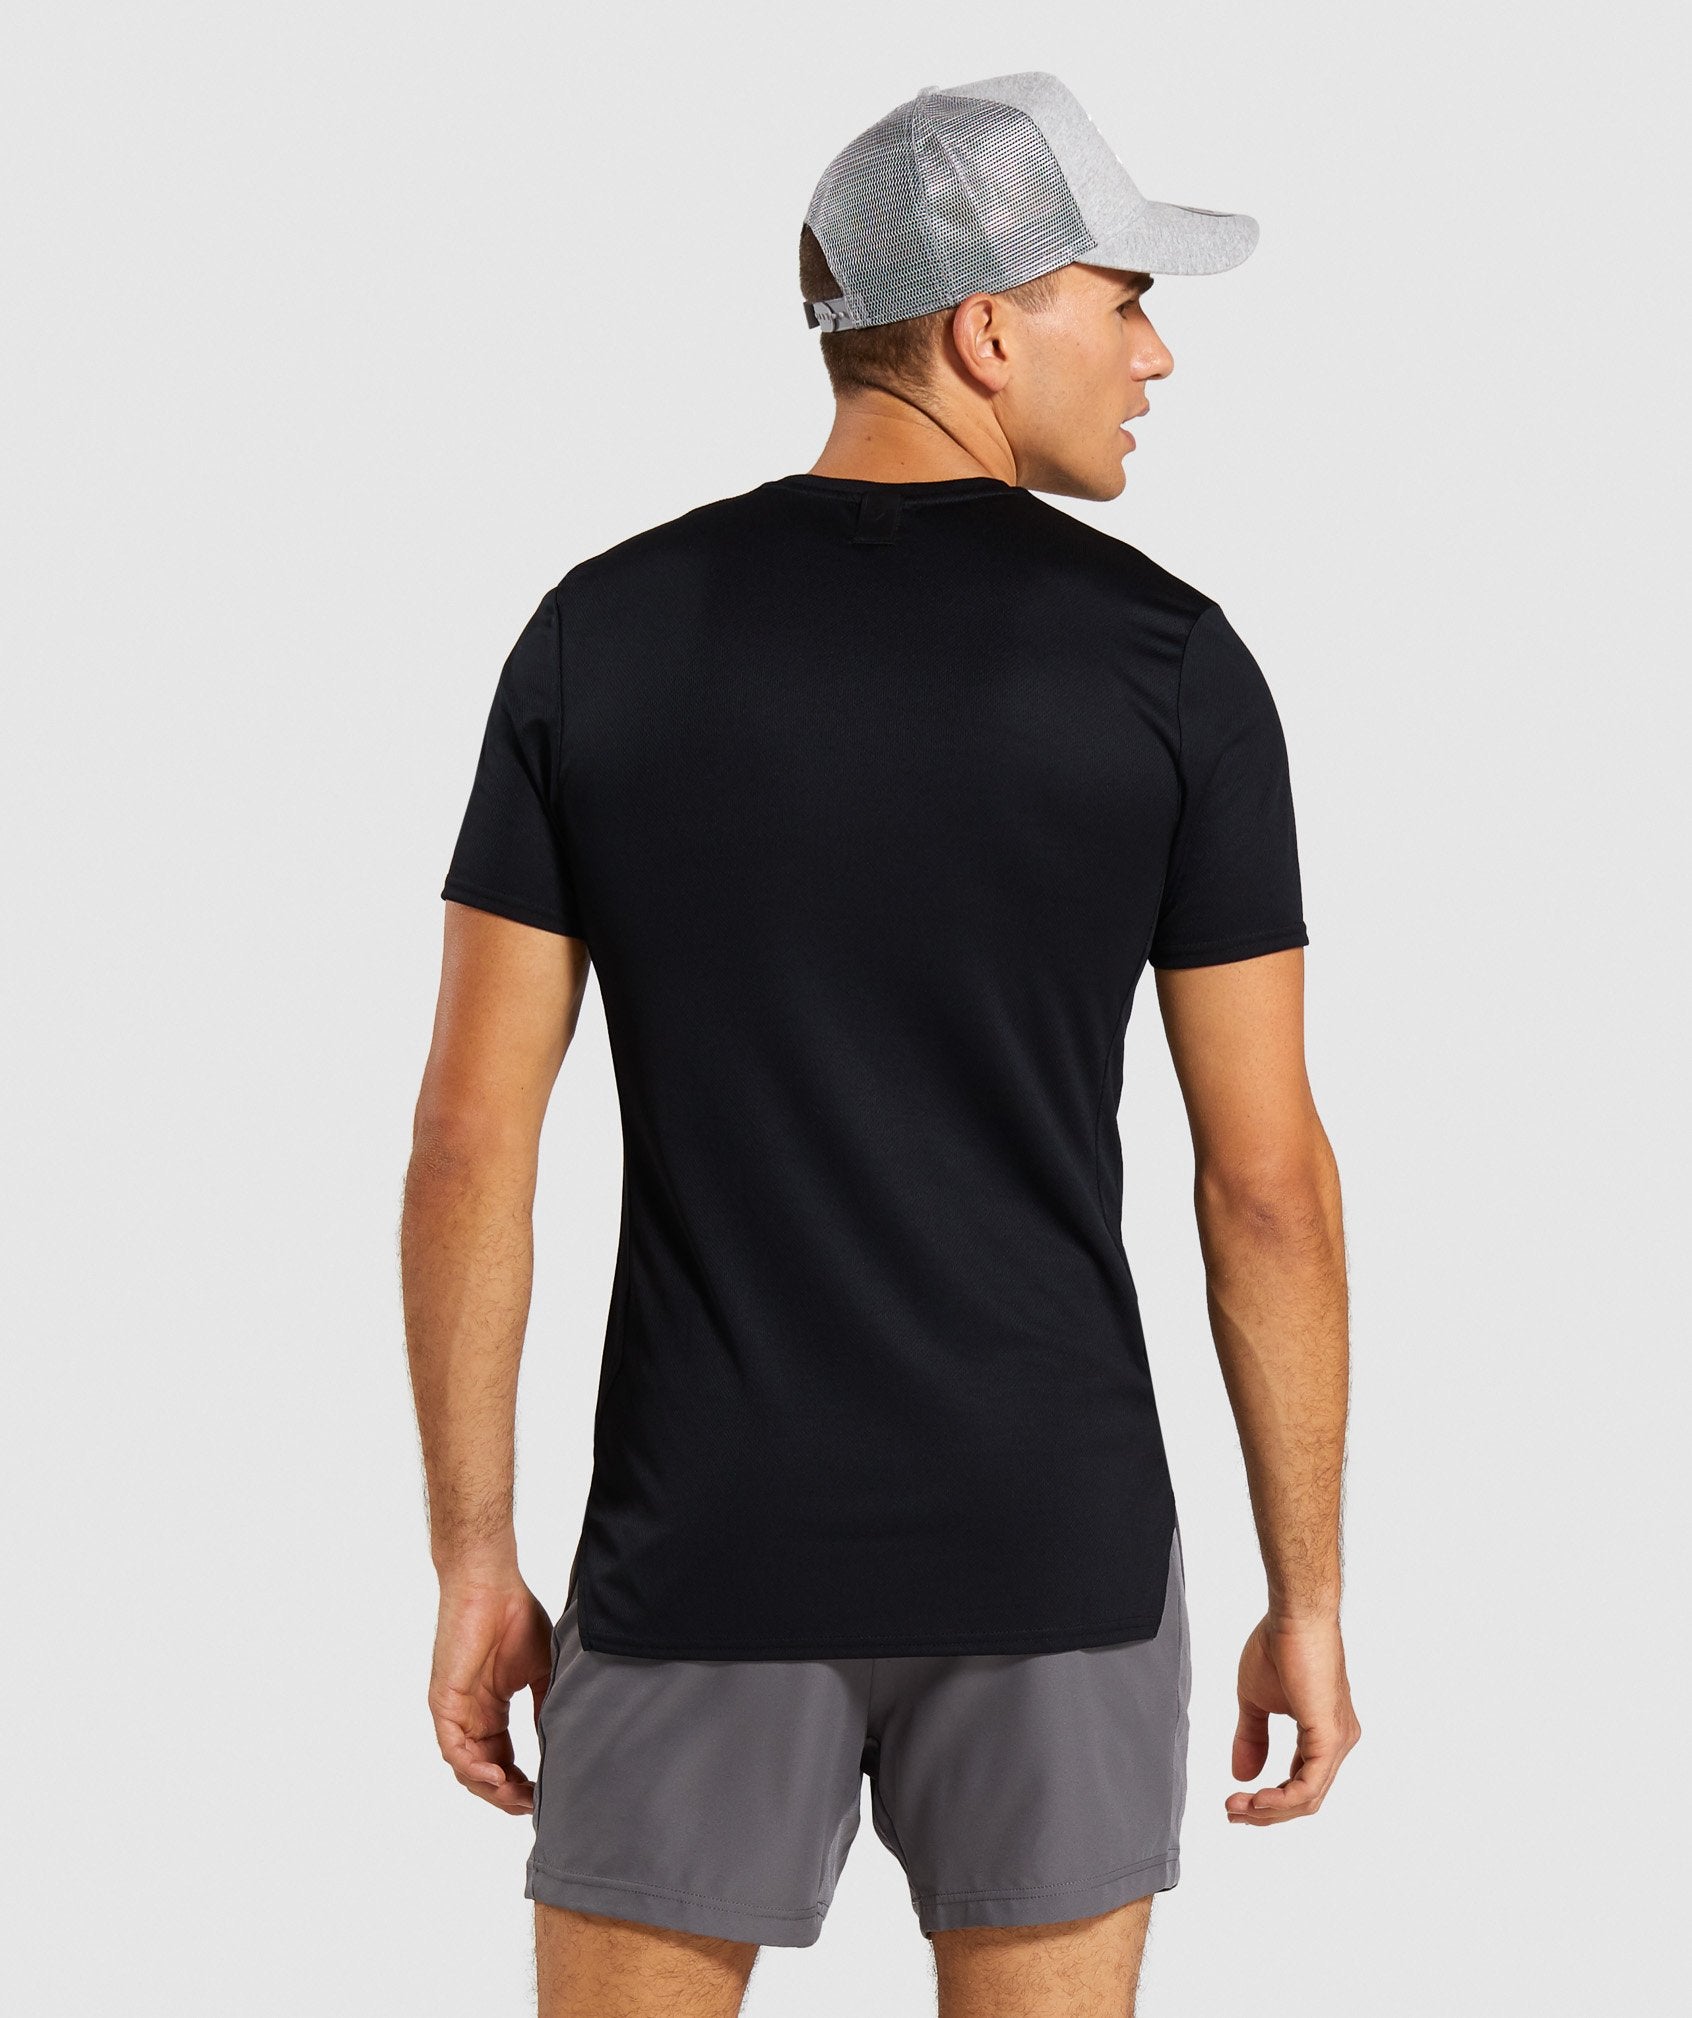 Recharge T-Shirt in Black - view 2